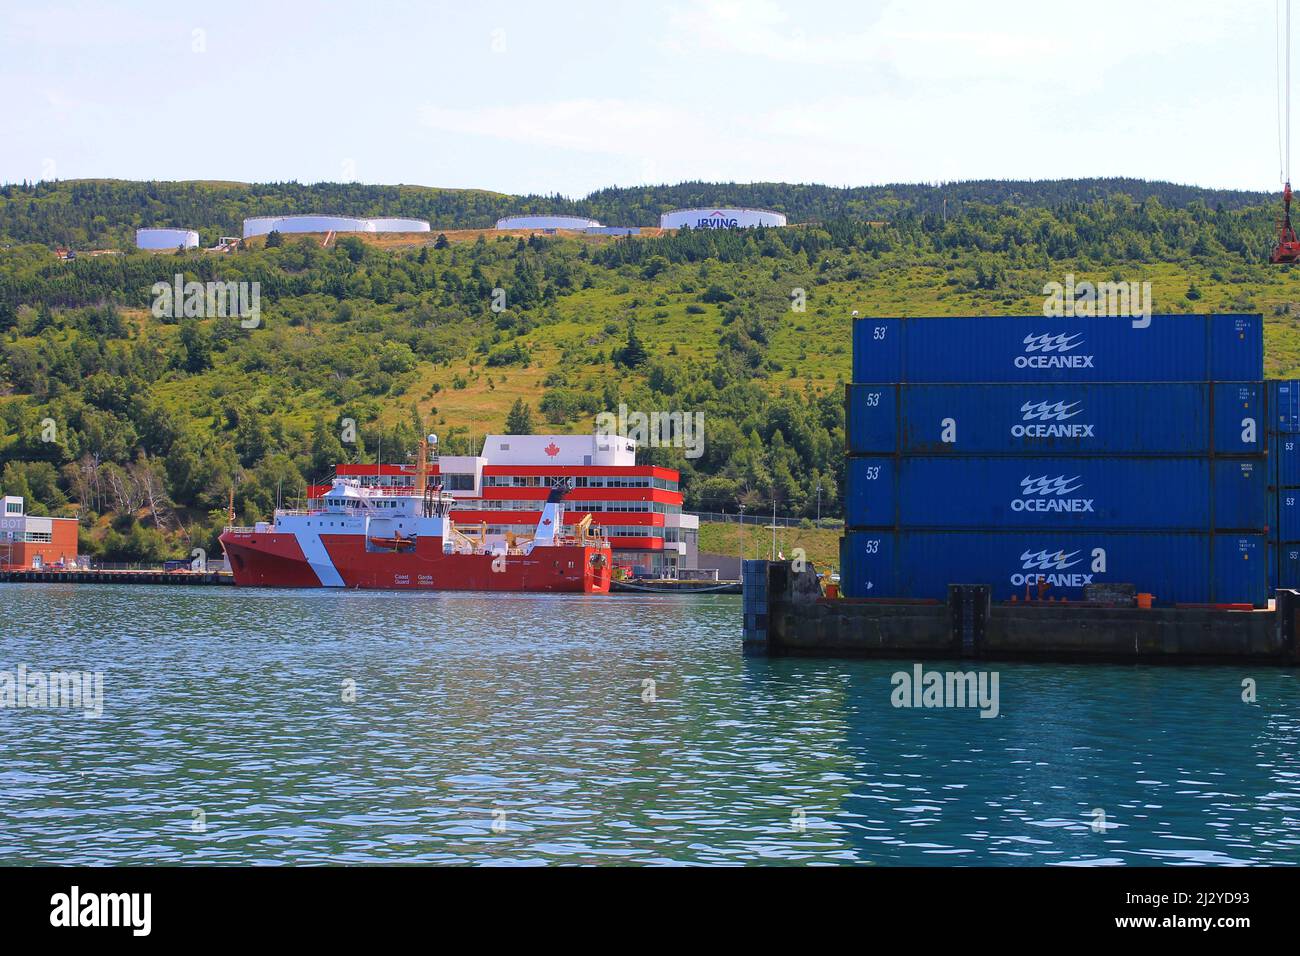 Shipping containers stacked on the end of a pier, Coastguard ship and building in background, St. John's Harbour. Stock Photo